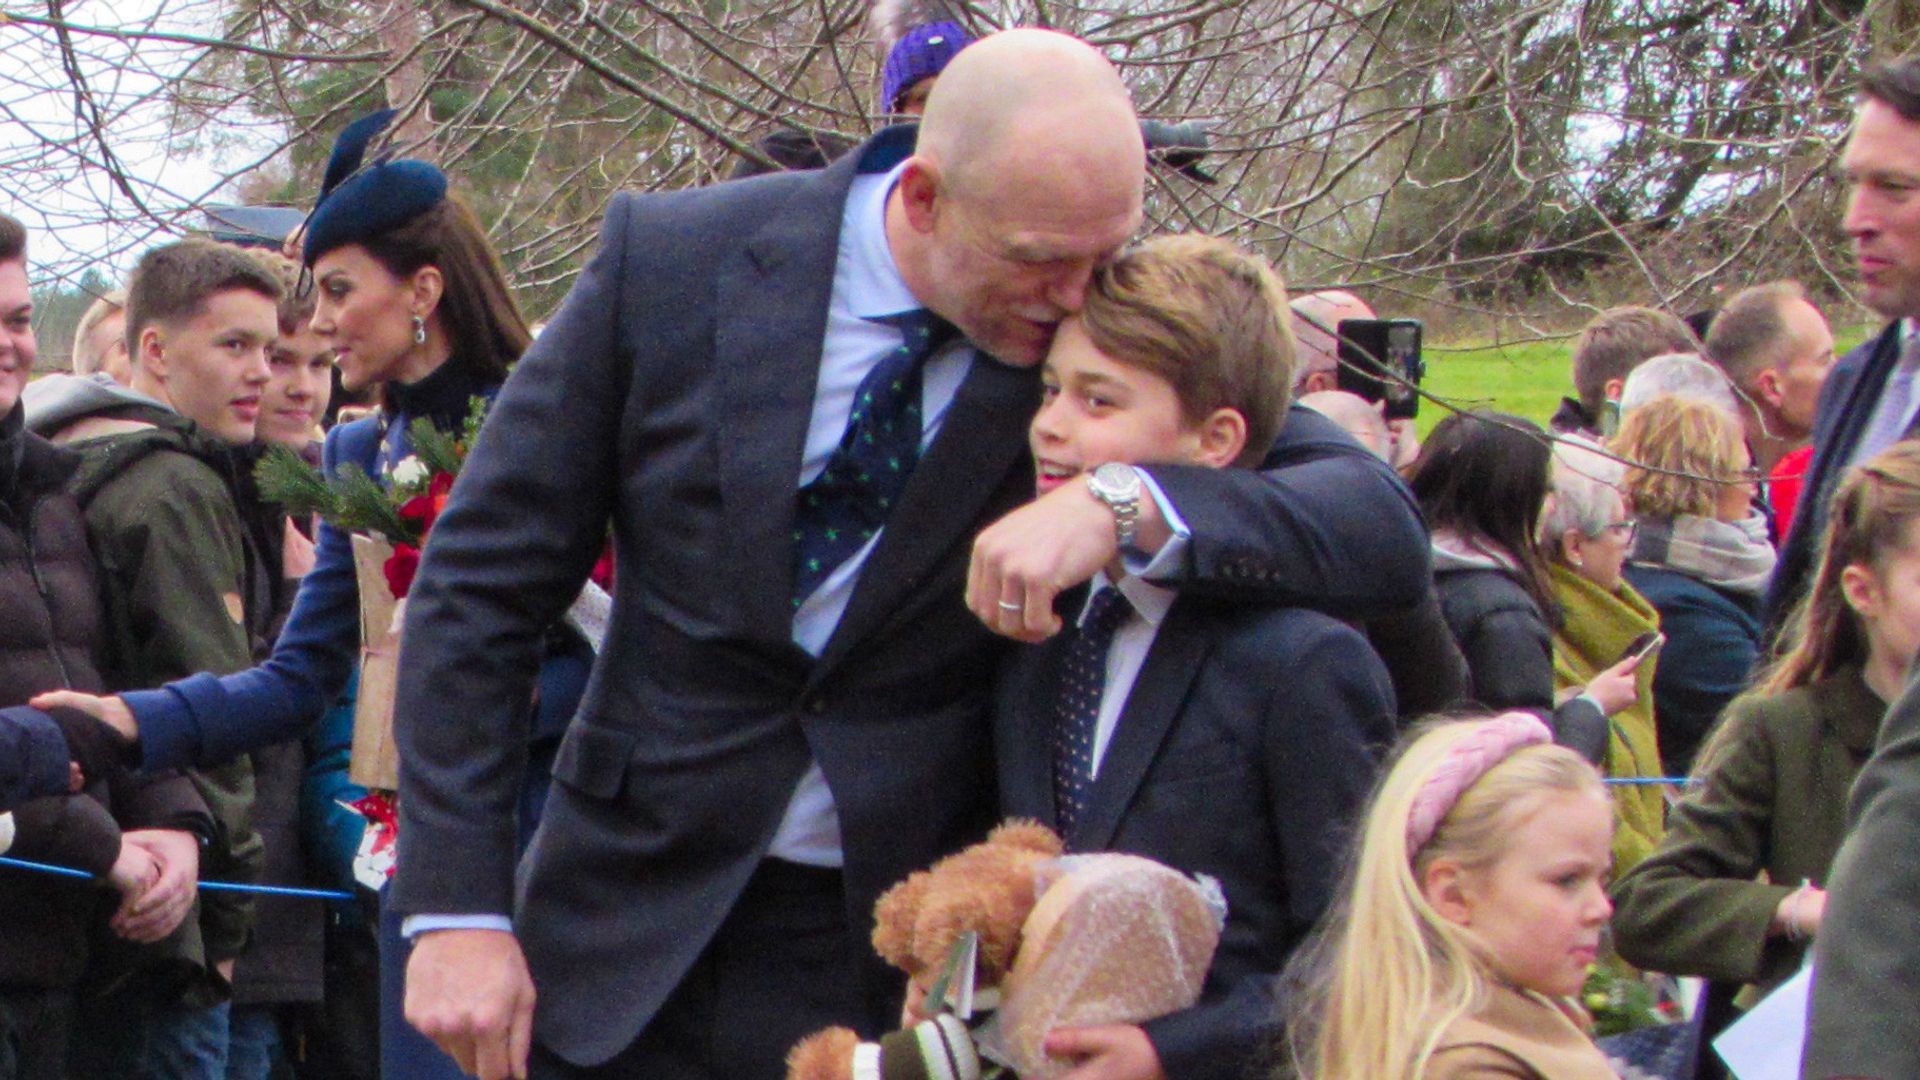 Sharon Moore/Geoff Robinson Photography Picture dated December 25th shows Mike Tindall giving Prince George a hug after the Christmas Day morning church service at St Mary Magdalene Church in Sandringham, Norfolk. A few minutes earlier the Prince was spotted sticking his tongue out at the photographers.
 